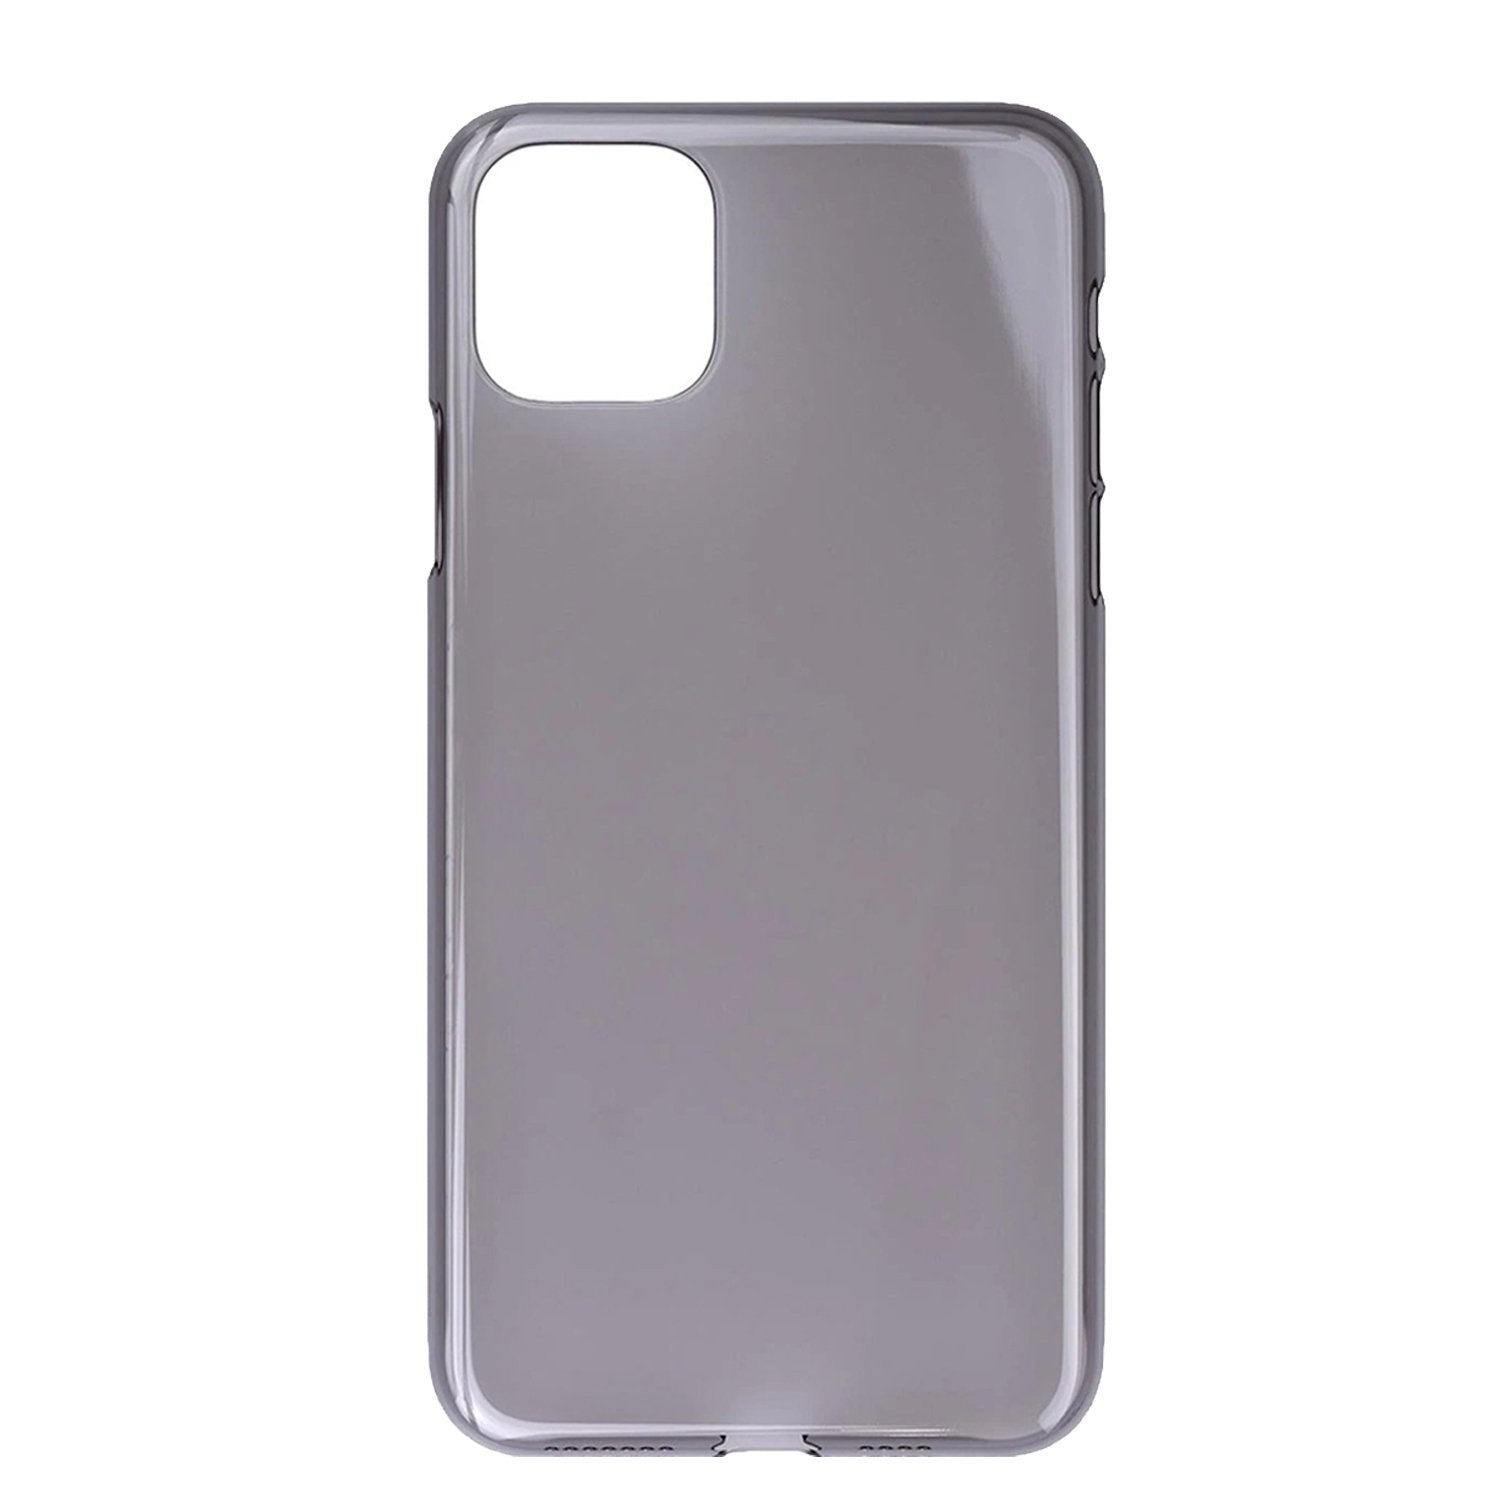 Power Support Air Jacket case for iPhone 12 mini 5.4"(2020), Clear Black Default Power Support 